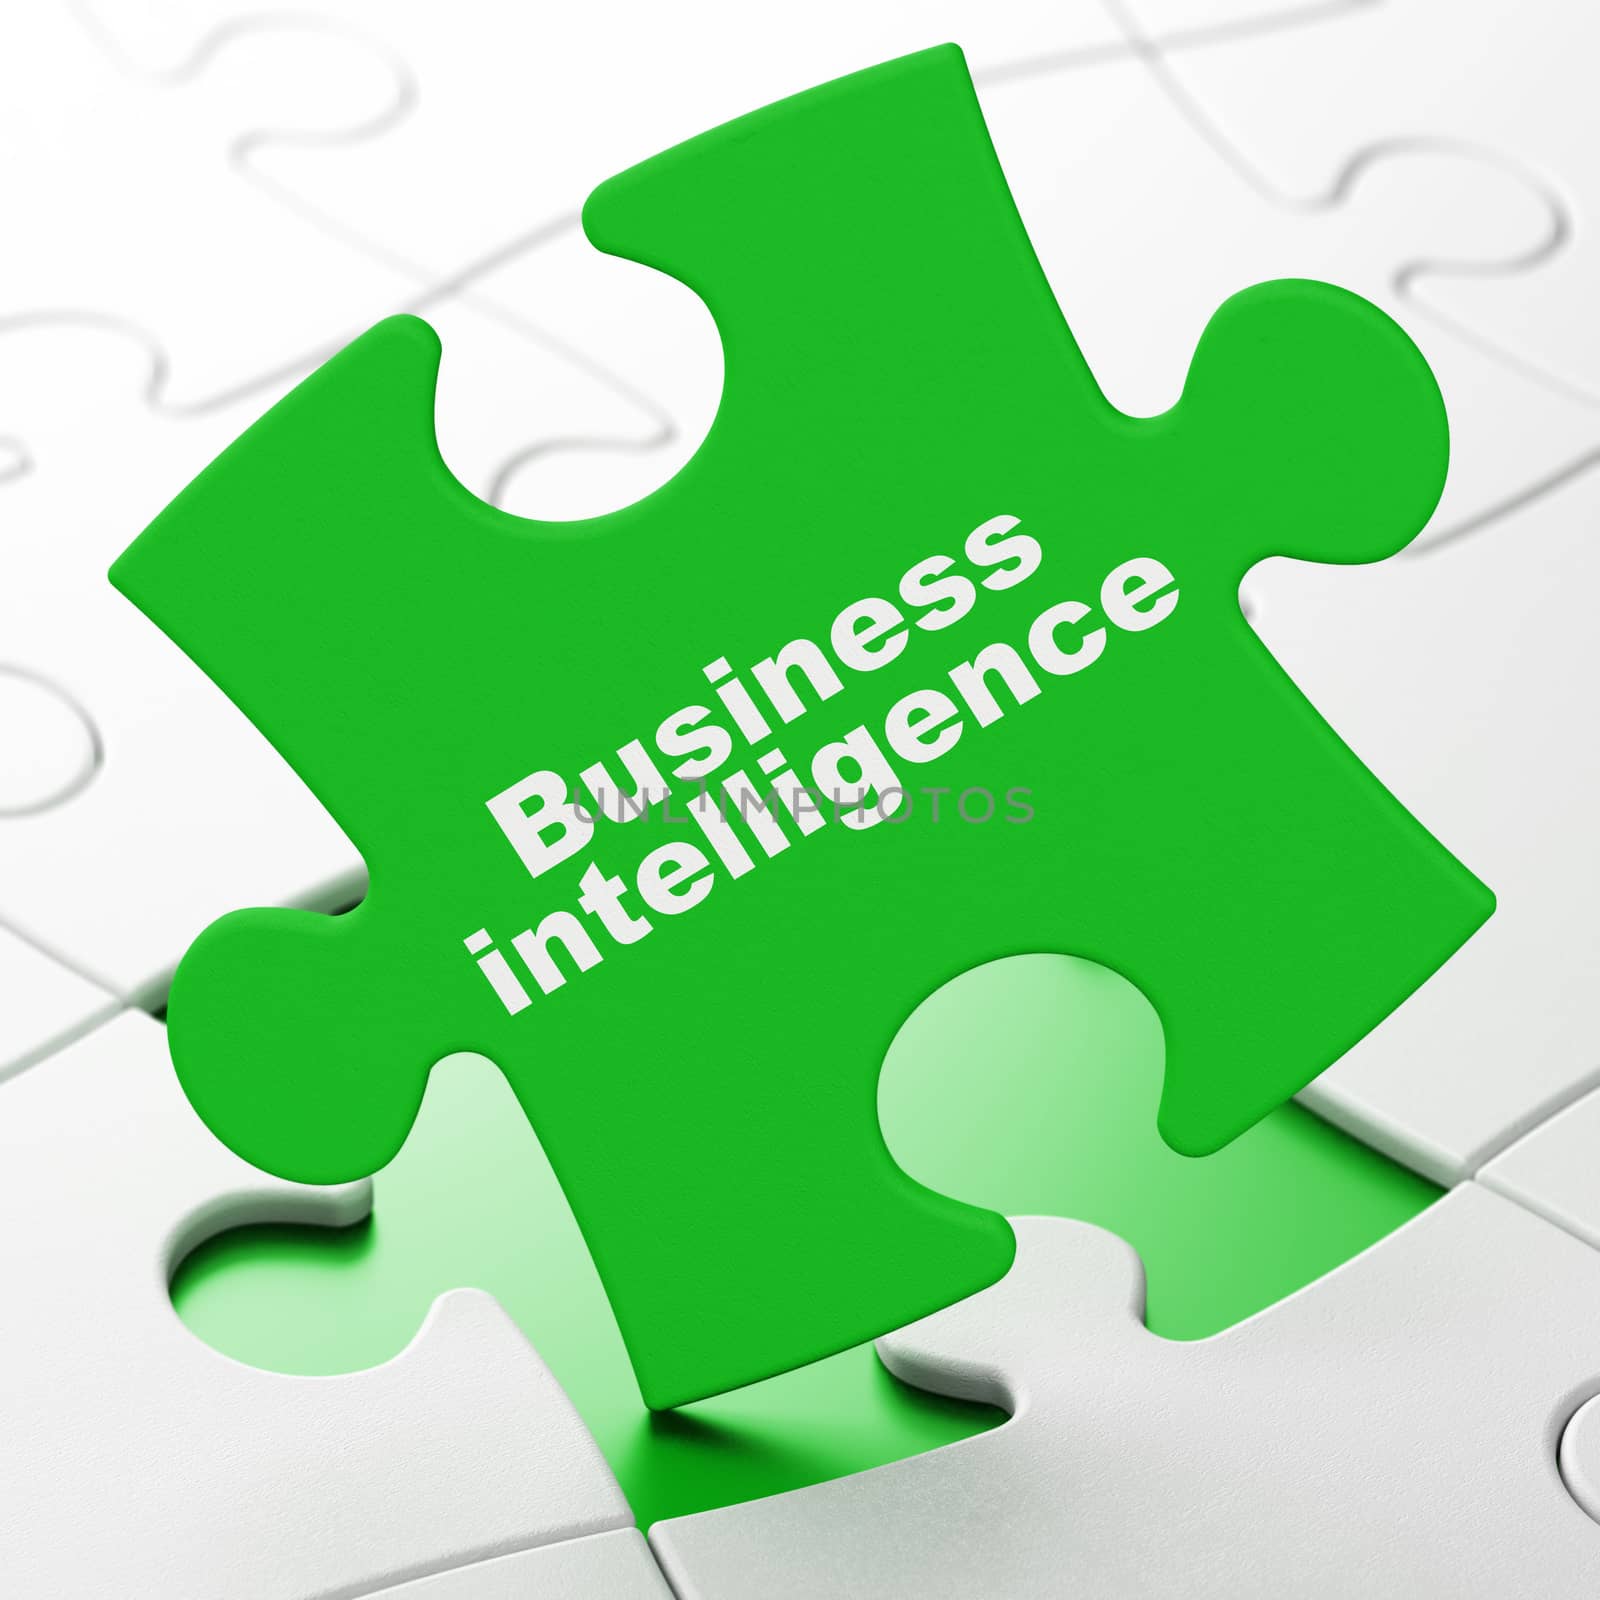 Business concept: Business Intelligence on Green puzzle pieces background, 3D rendering